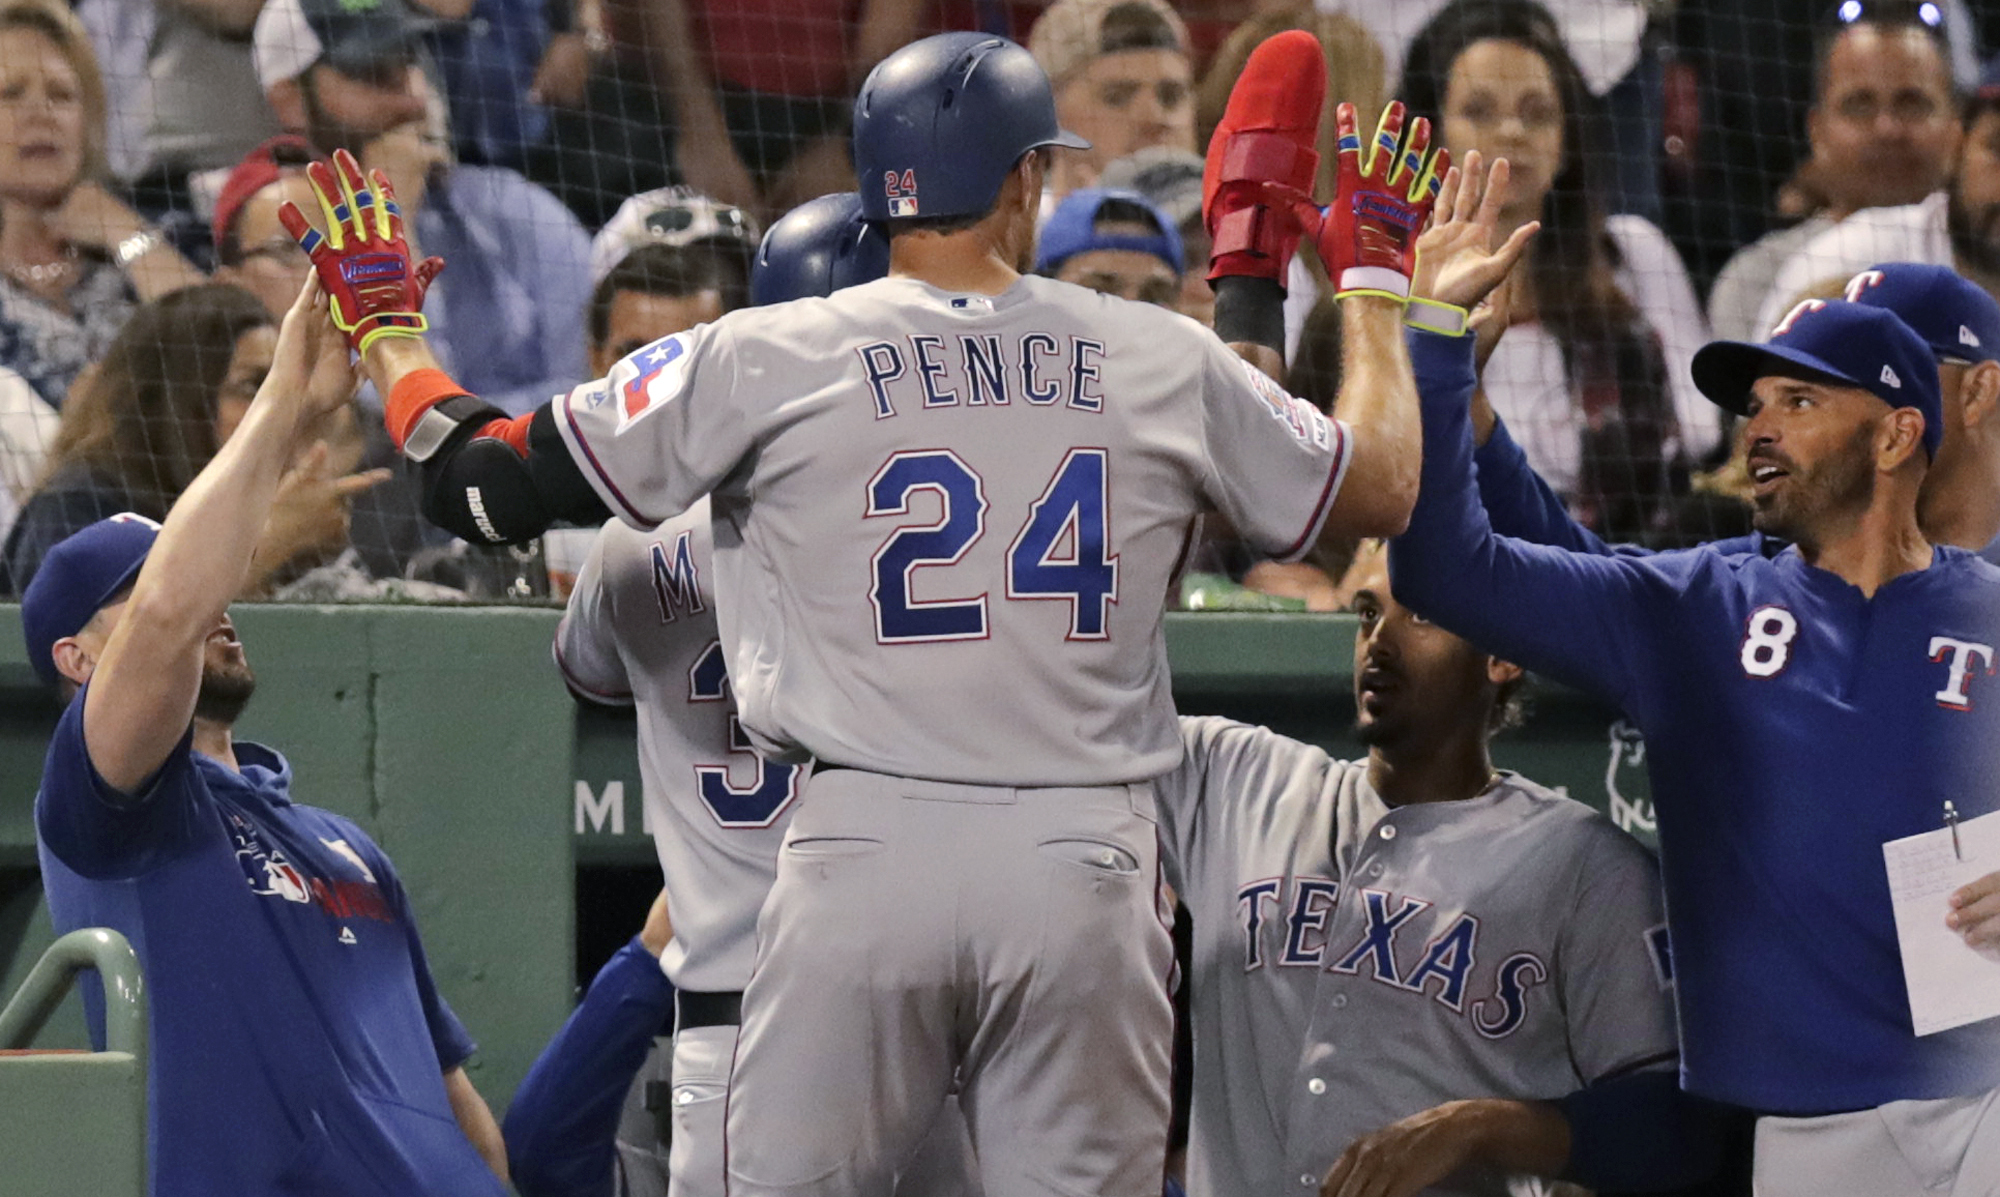 Pence hits inside-the-park HR, Rangers beat Red Sox 9-5